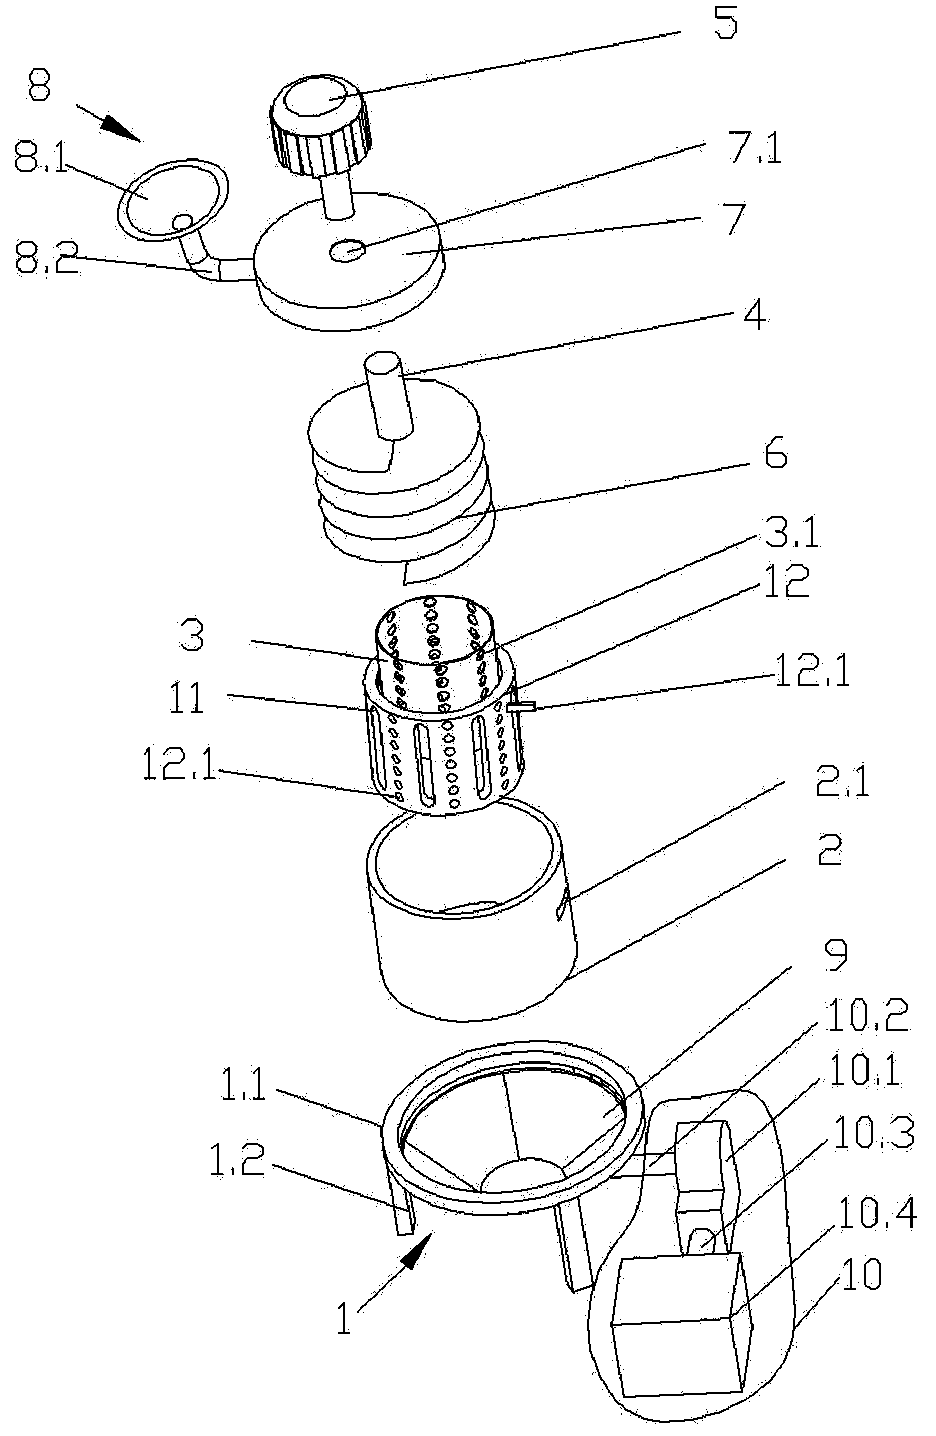 Straw compression device capable of adjusting moulding size